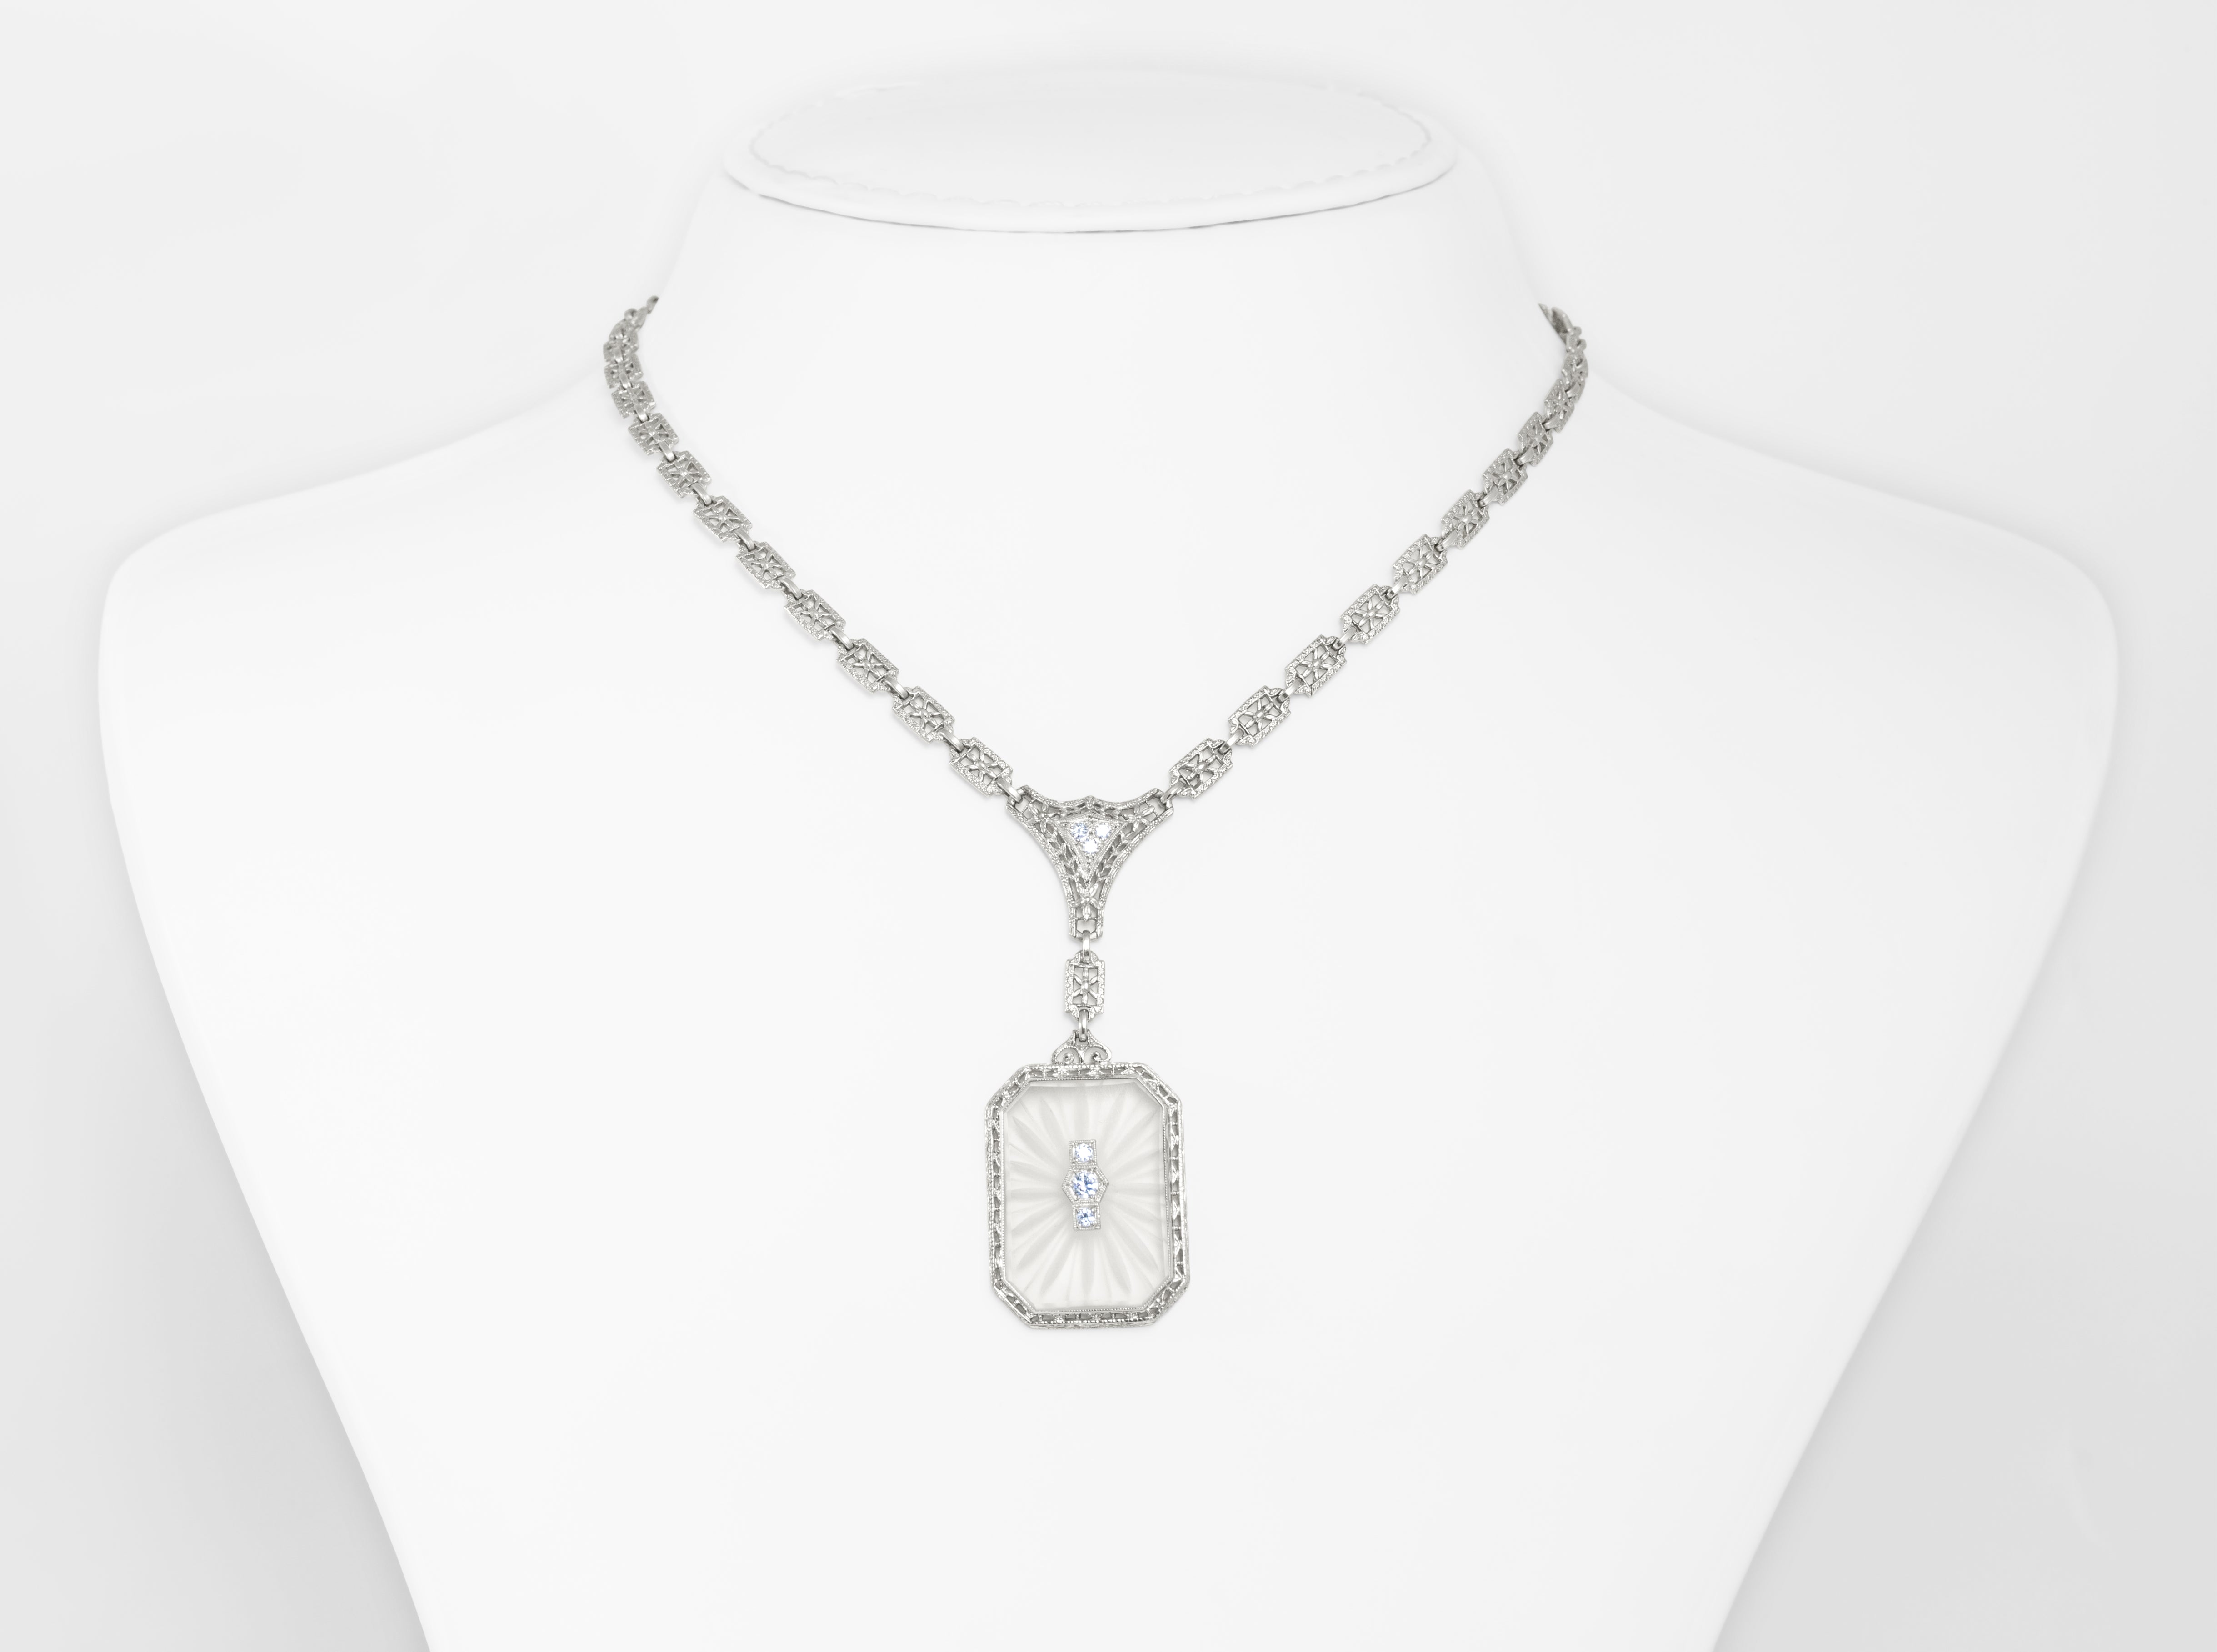 crystal necklace in platinum and diamonds from the Art Deco era.